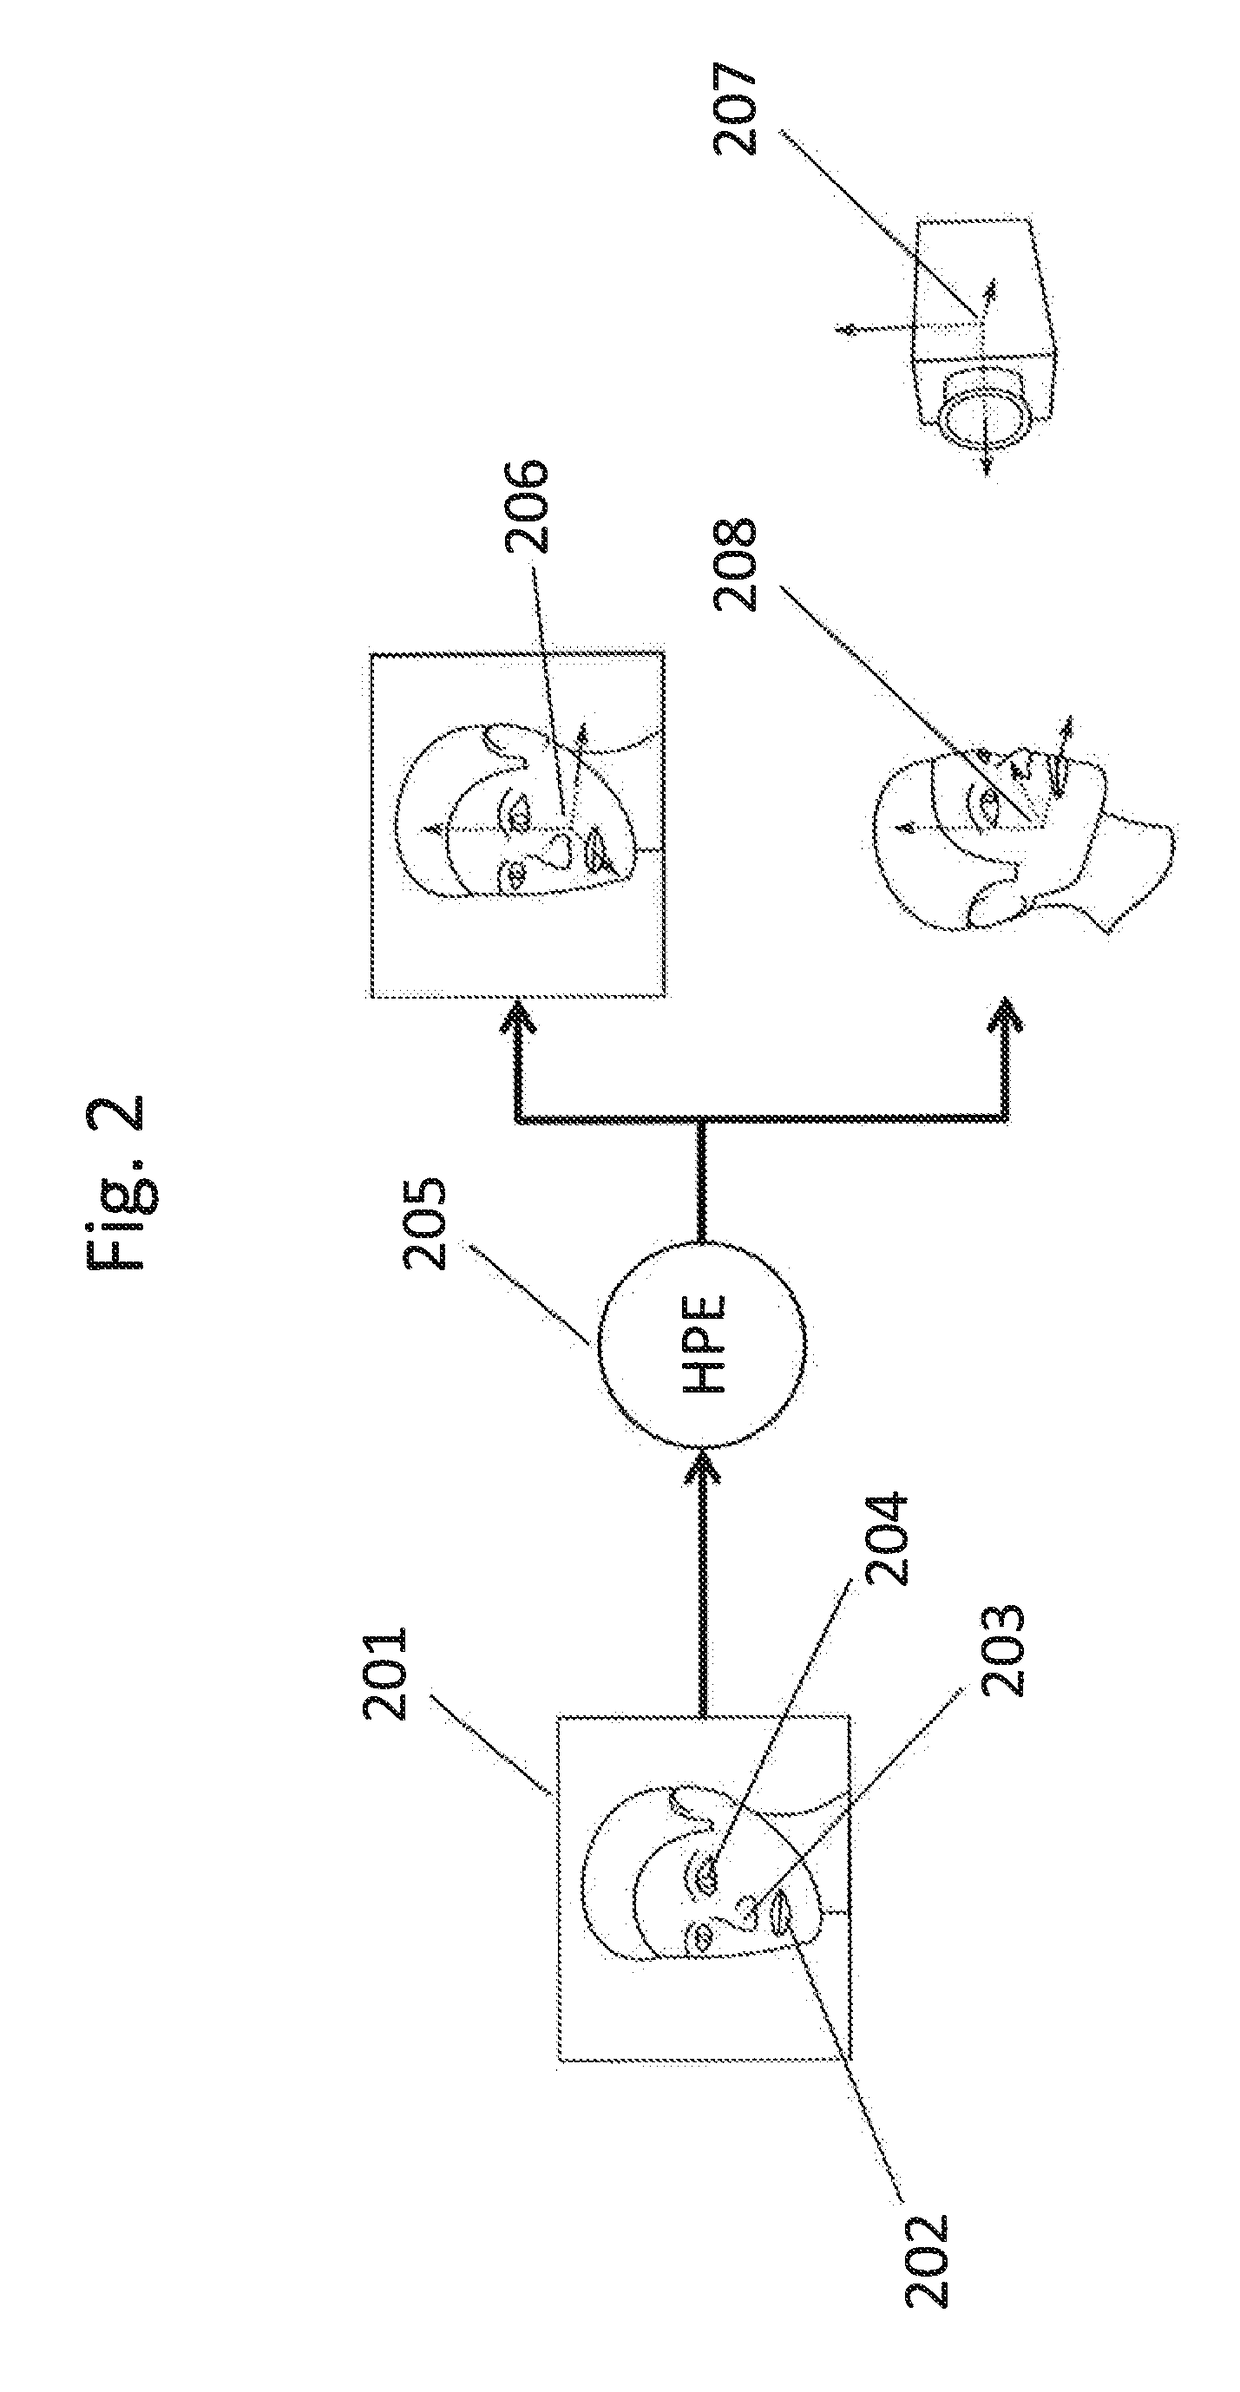 Method and system for representing a virtual object in a view of a real environment